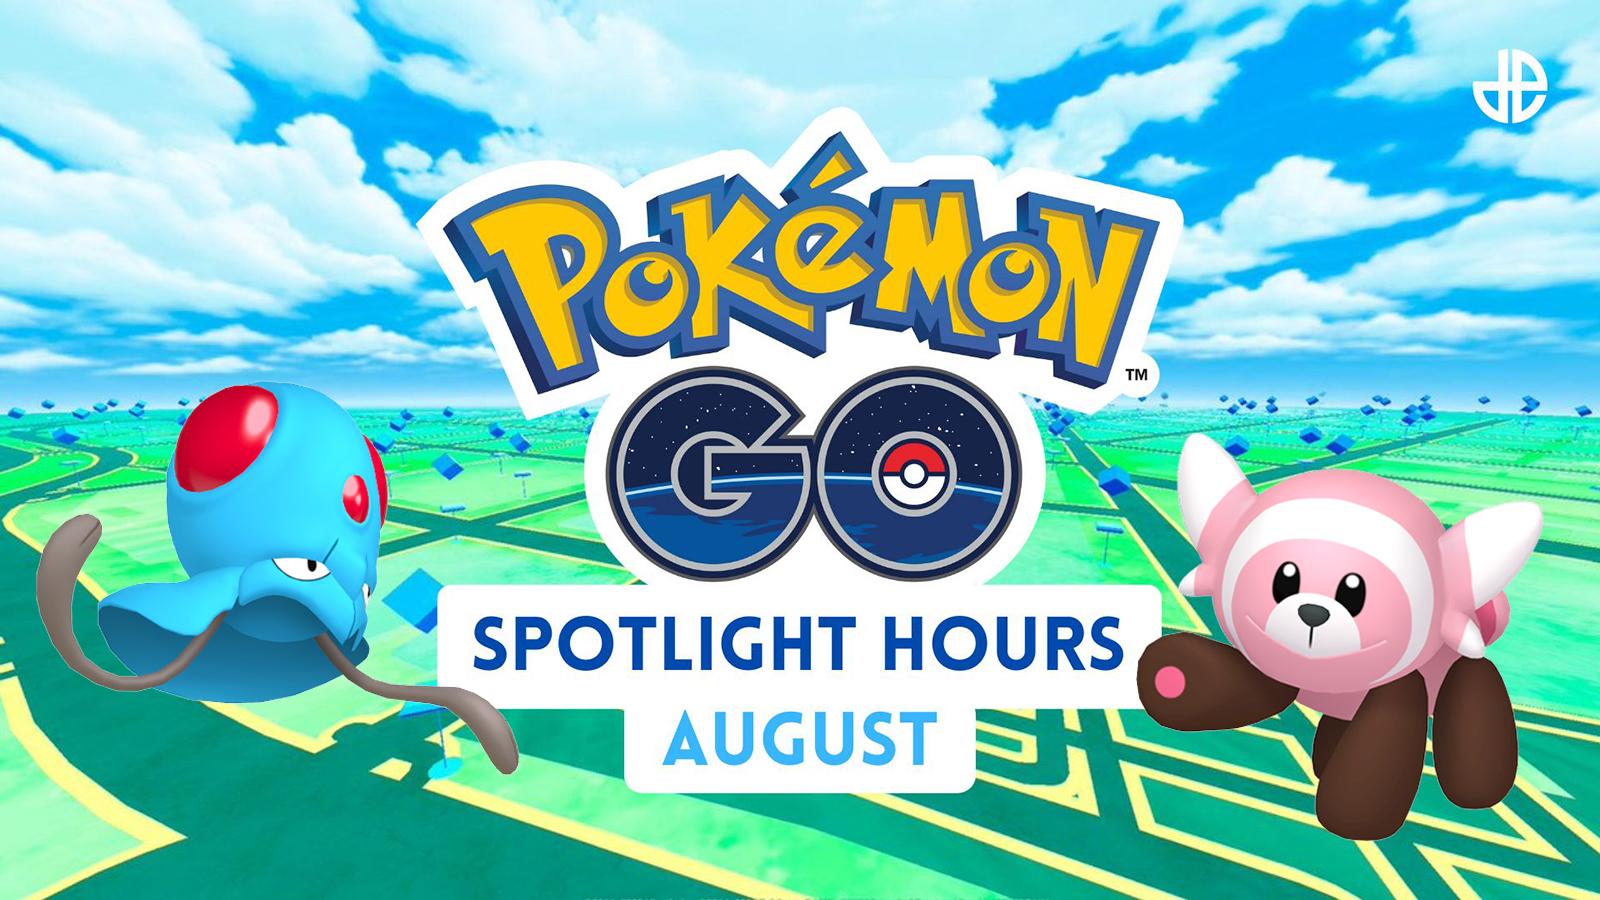 Stufful appearing in the Pokemon Go Spotlight Hour schedule for August